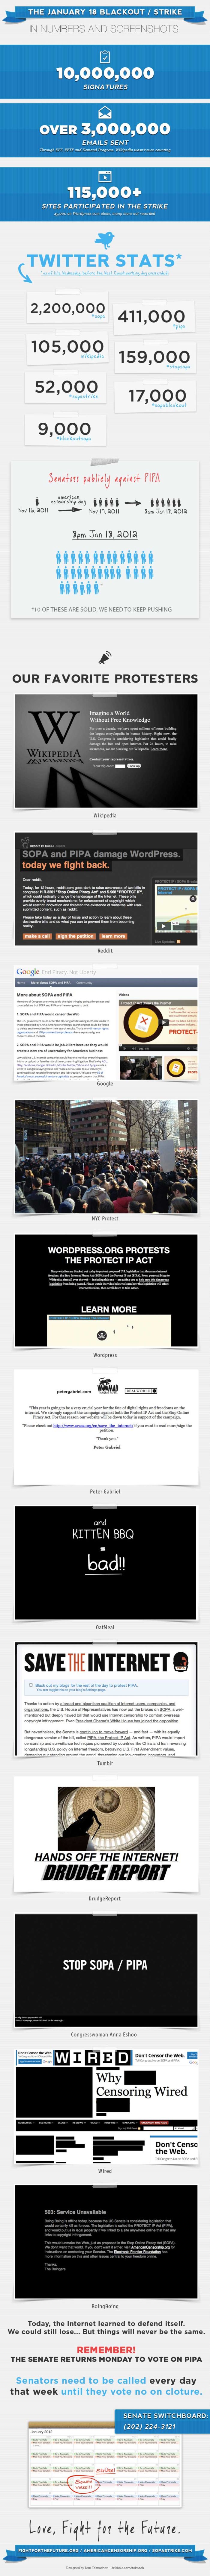 SOPA Strike Facts (infographic)